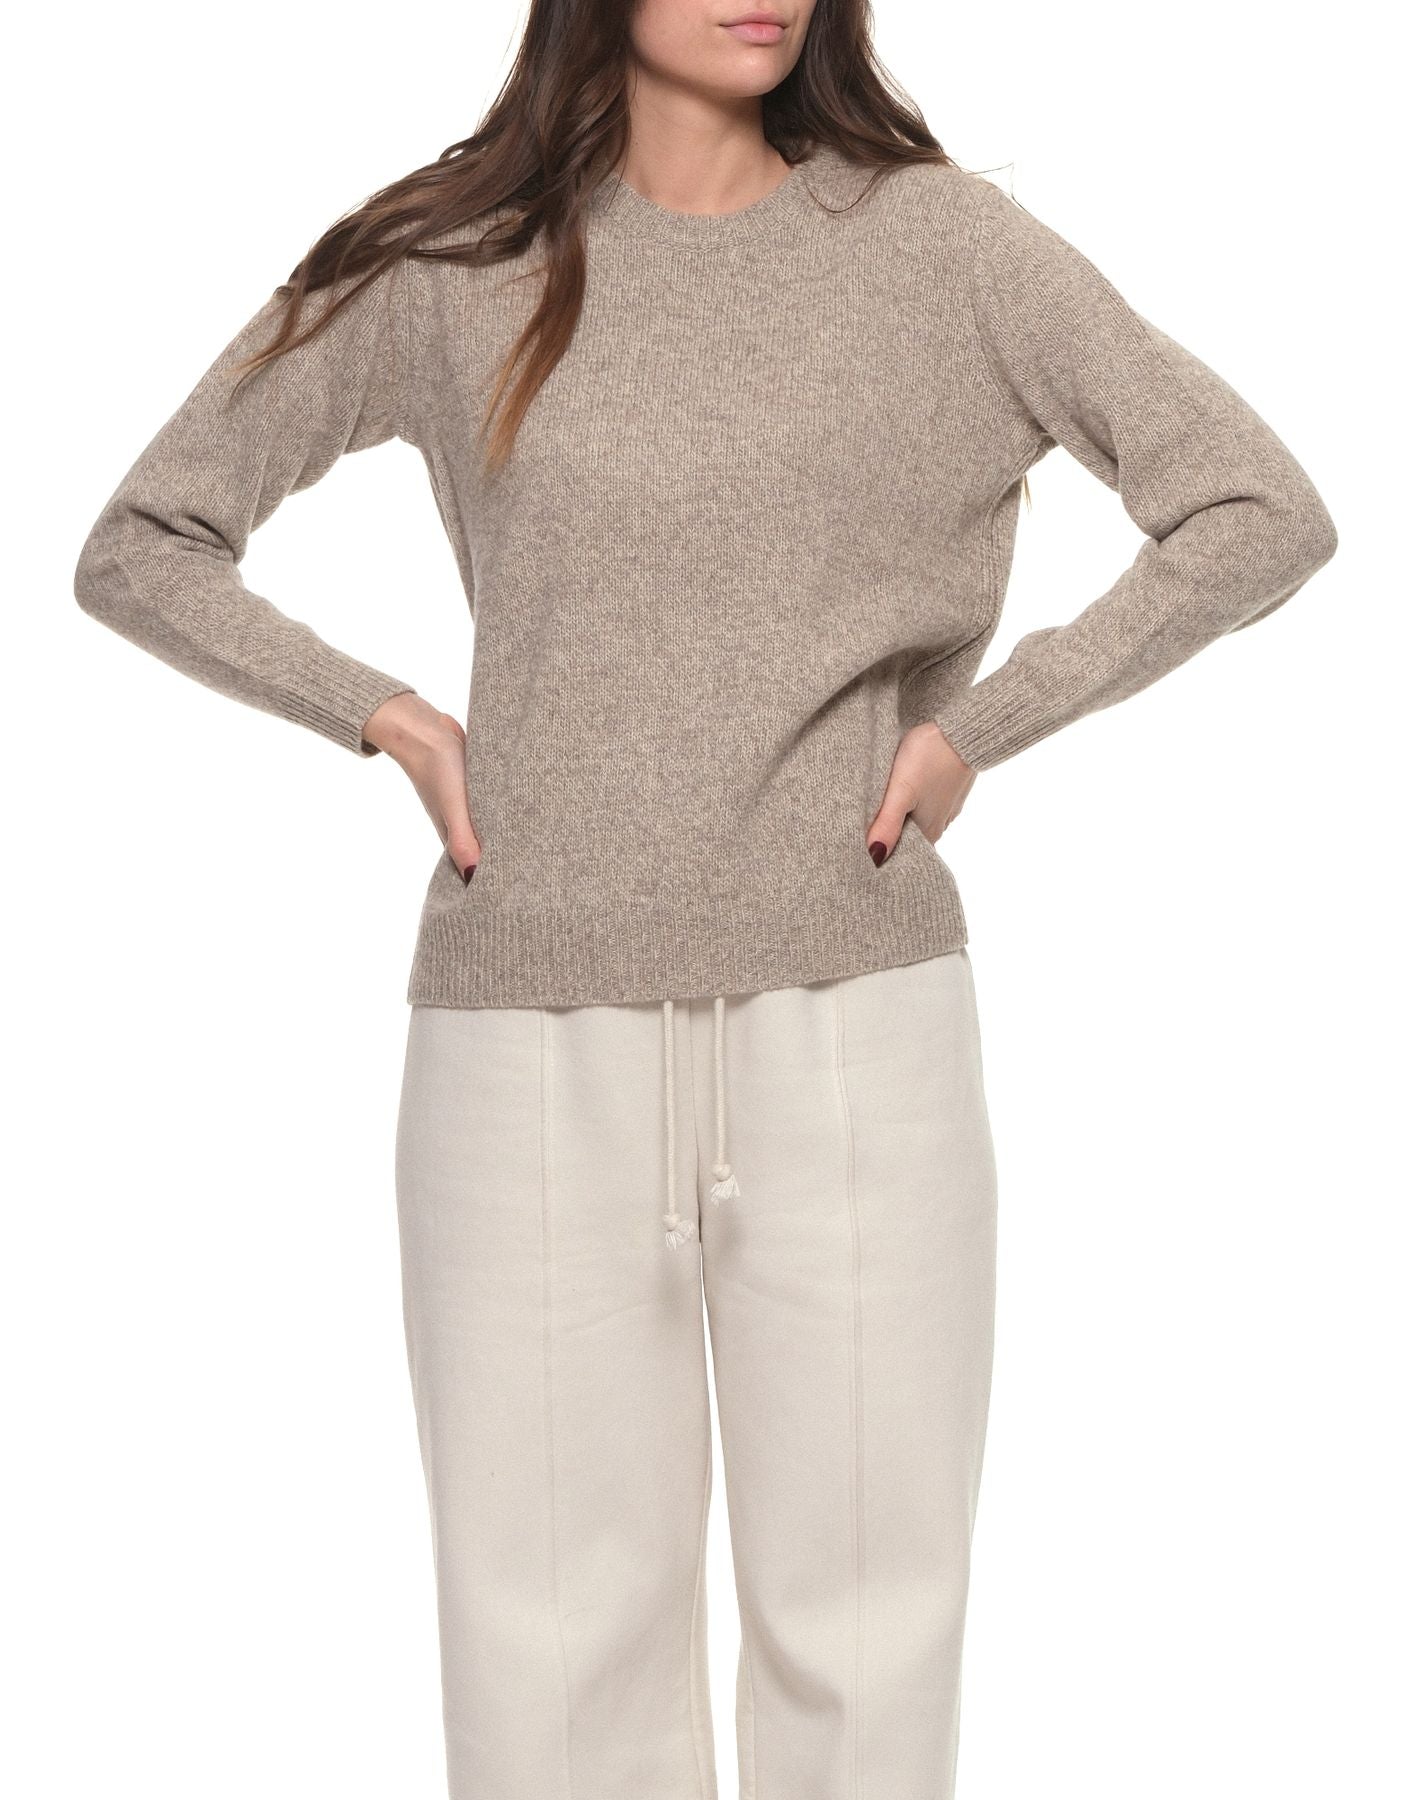 Sweater for Woman CT20391 C.T. placentero